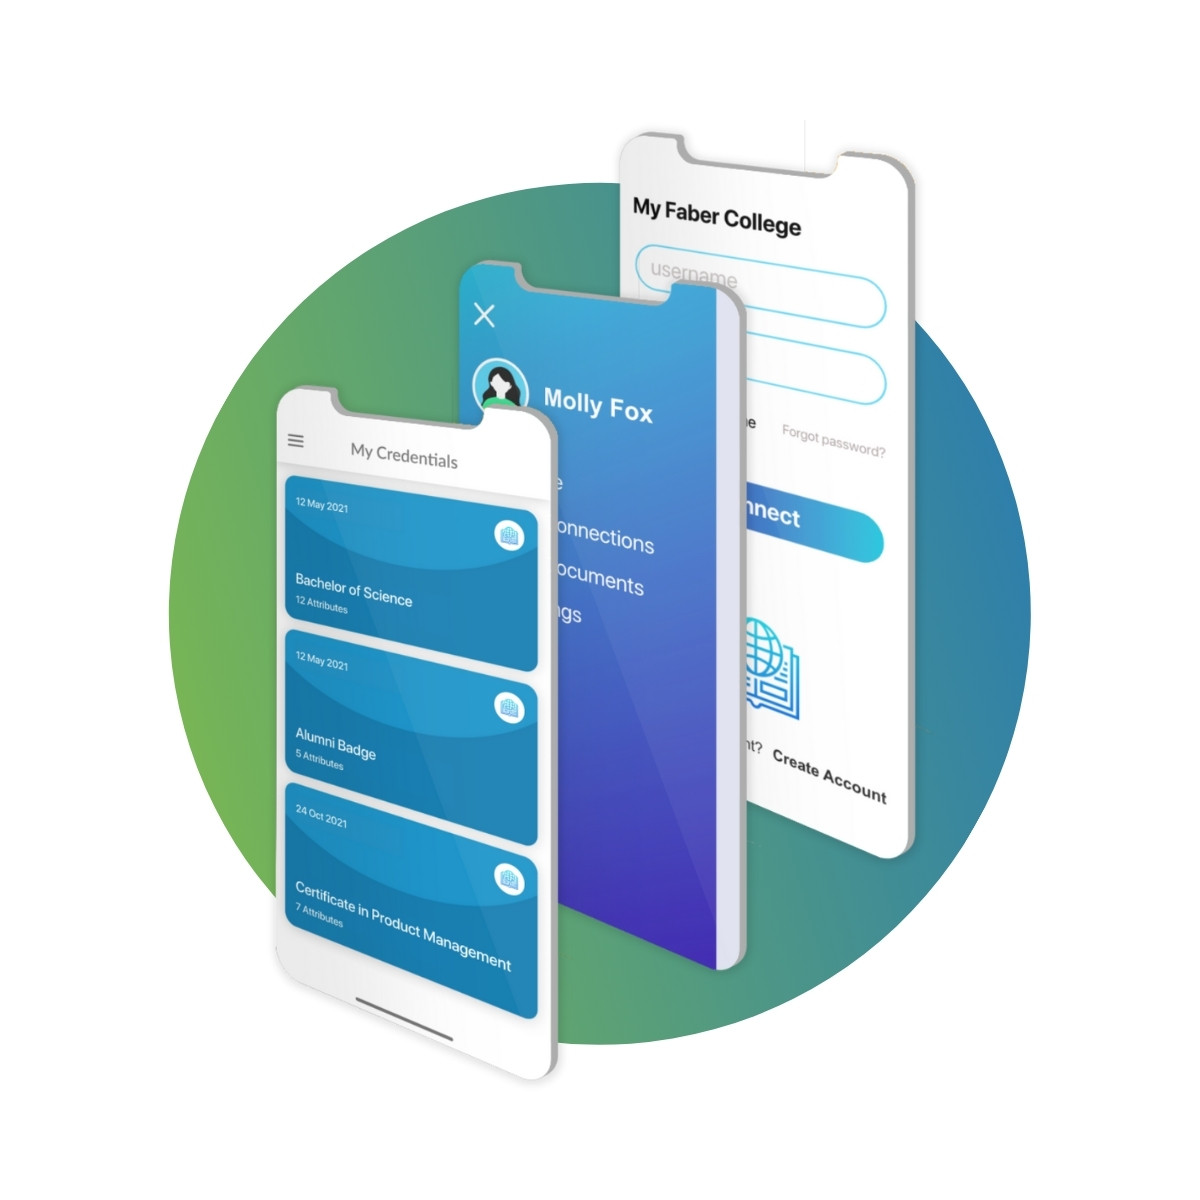 The Evernym Mobile SDK adds digital wallet functionality to any mobile app